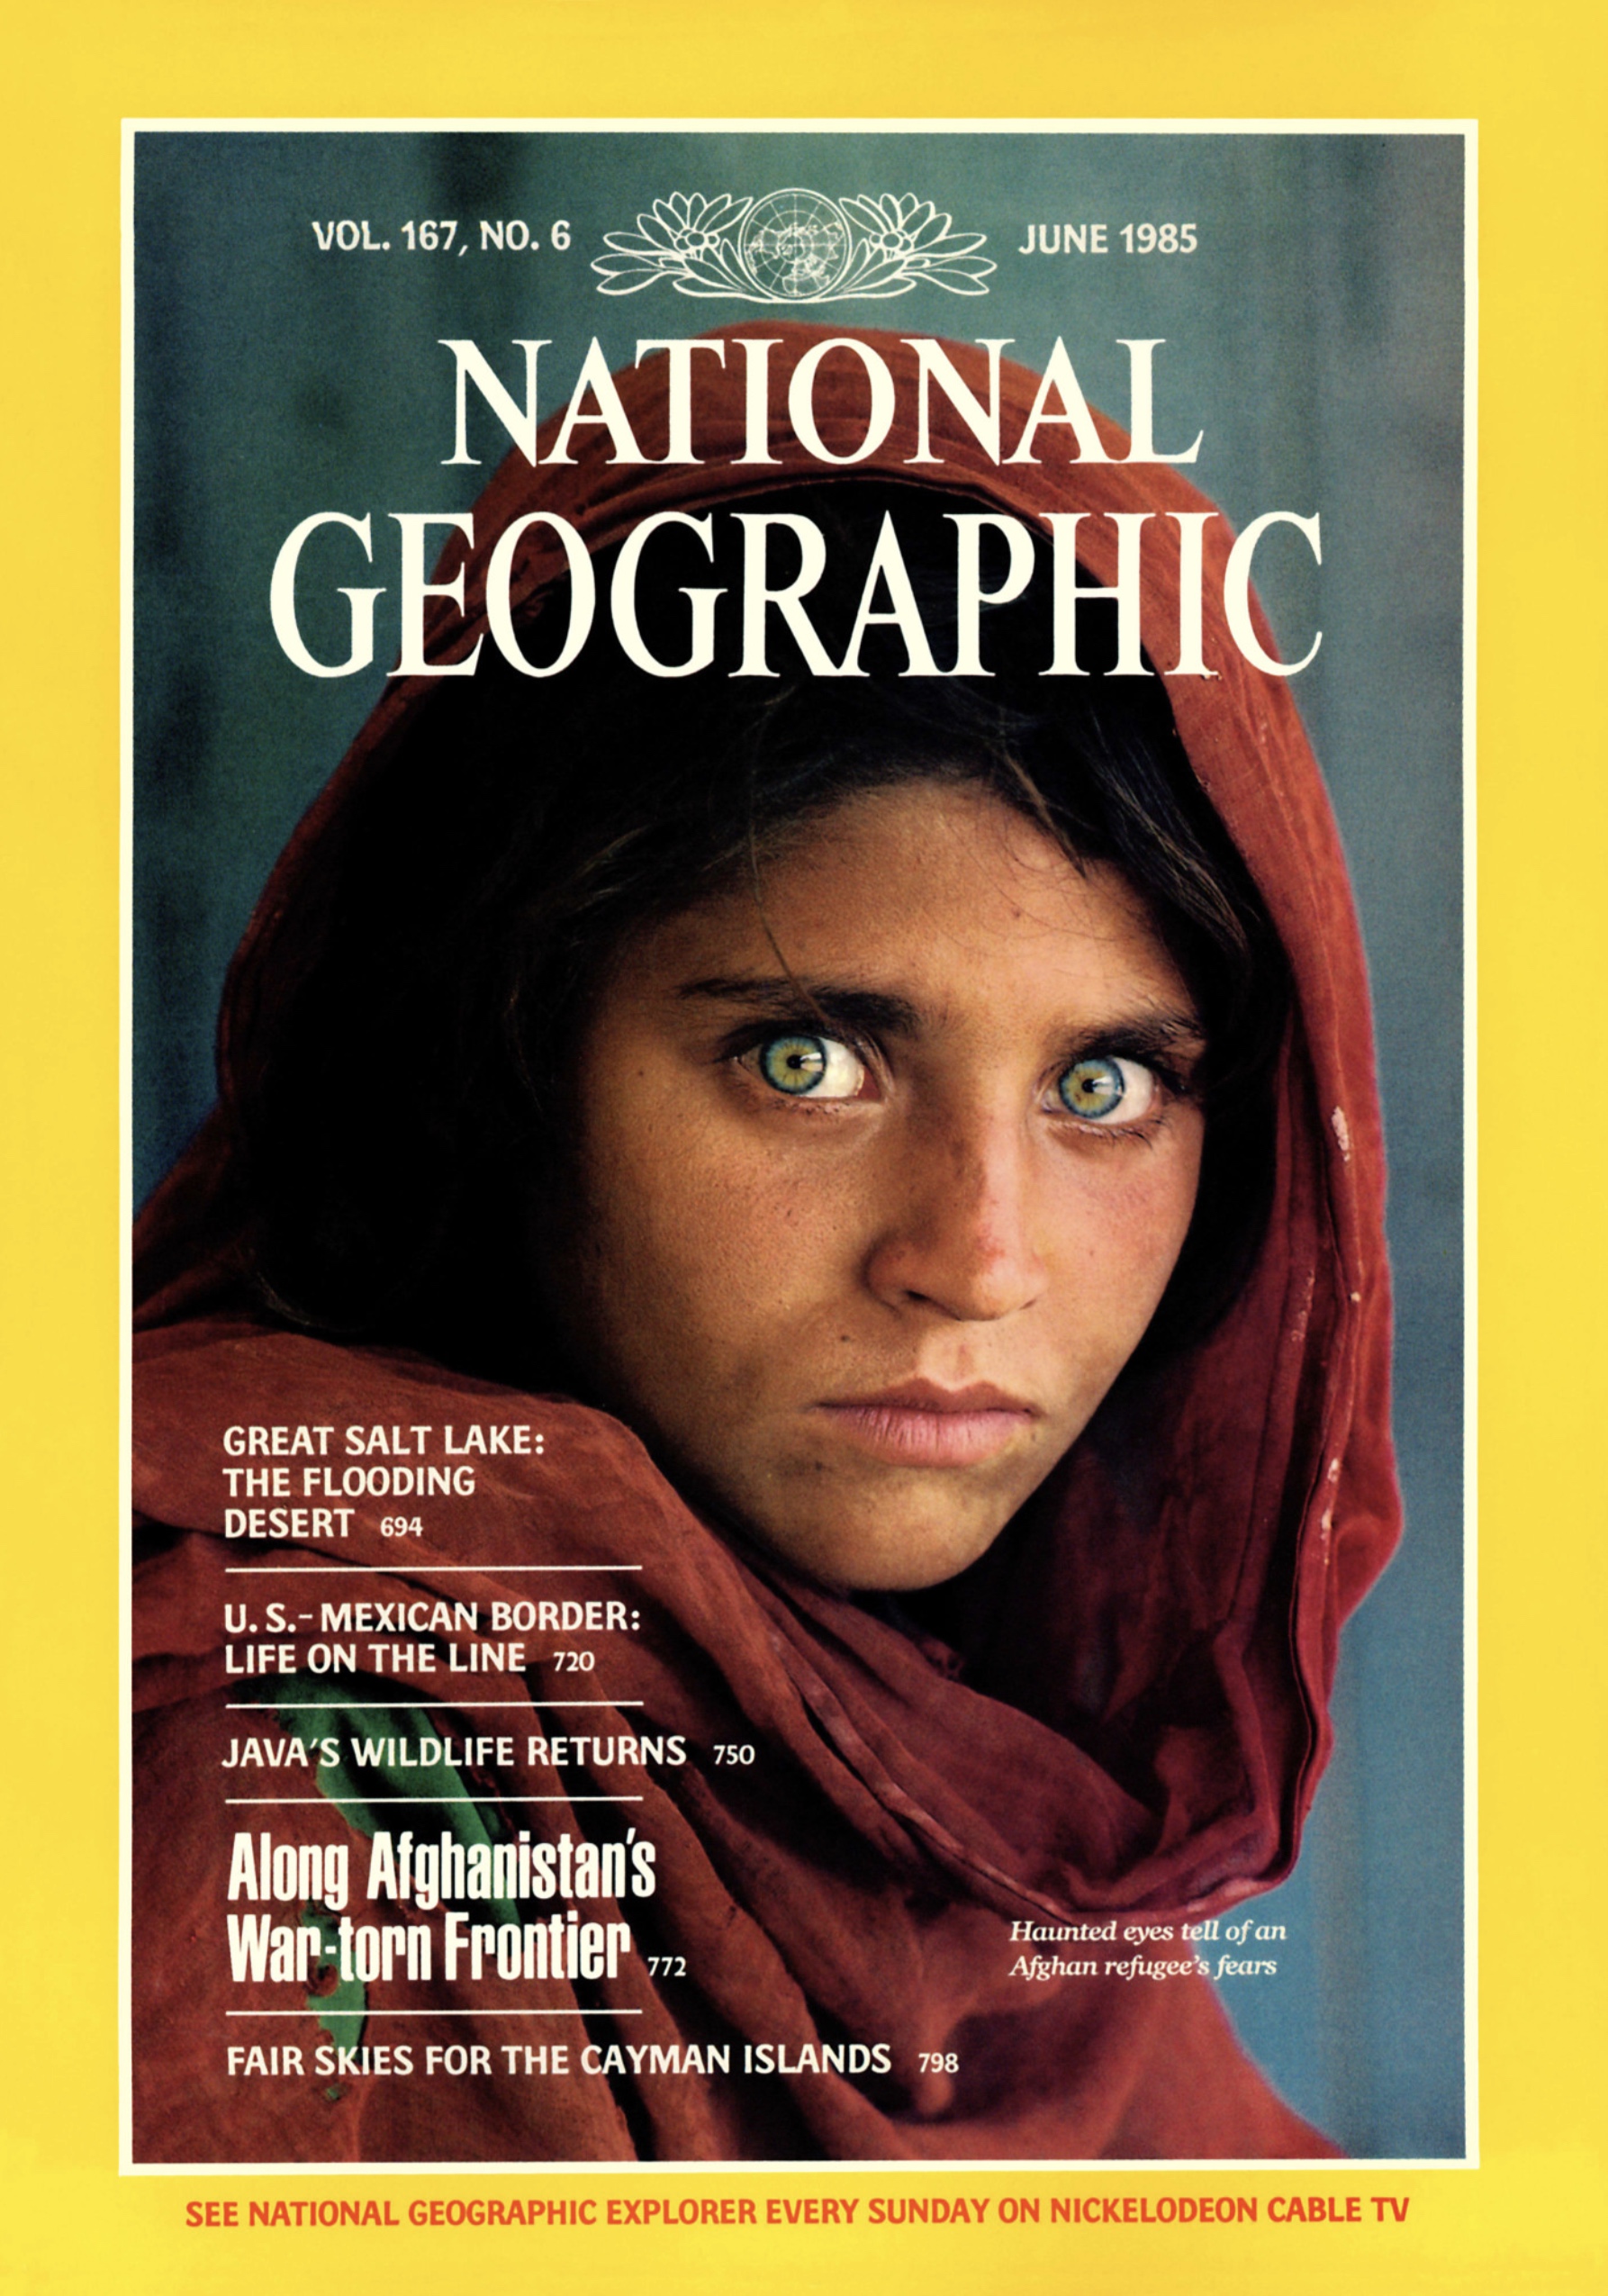 Access 132 years of National Geographic magazine - Newton Public Library